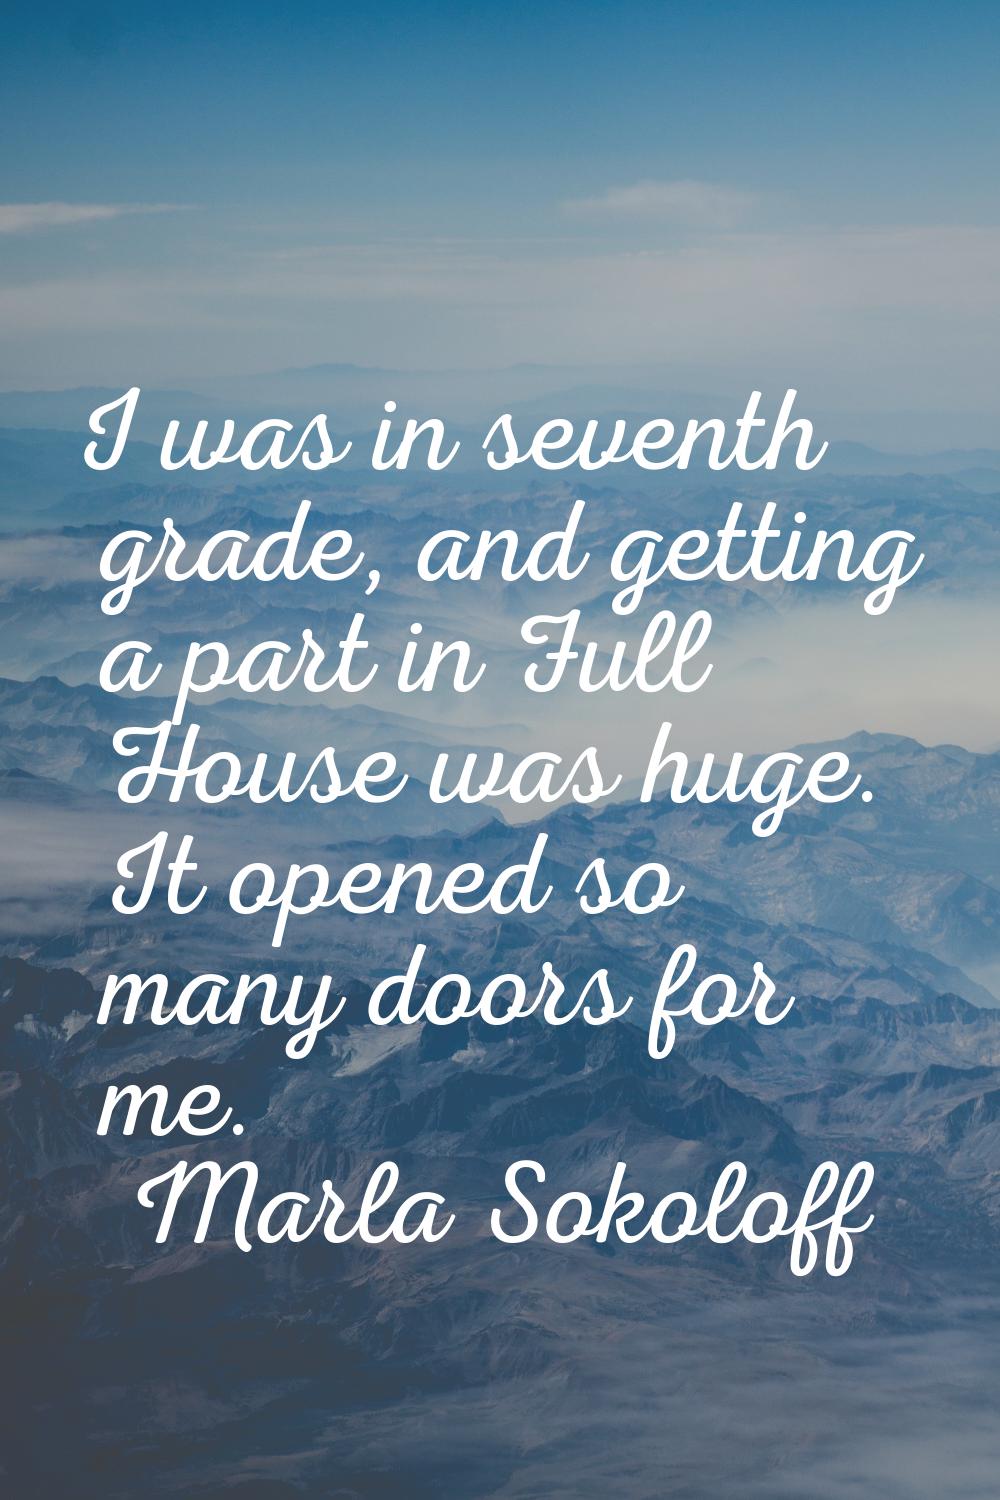 I was in seventh grade, and getting a part in Full House was huge. It opened so many doors for me.